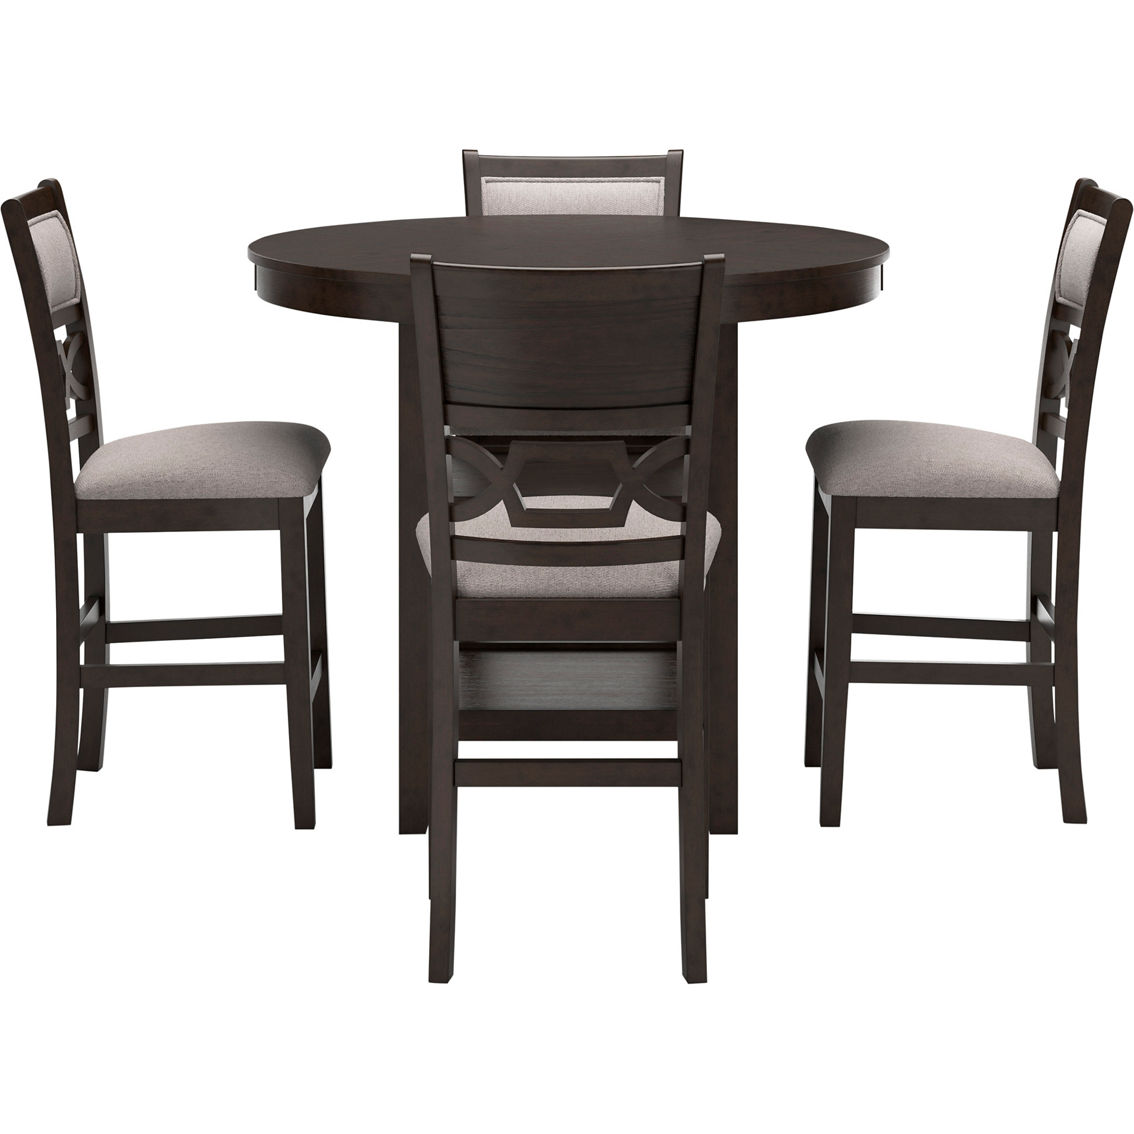 Signature Design by Ashley Langwest 5 pc. Counter Height Dining Set - Image 2 of 4